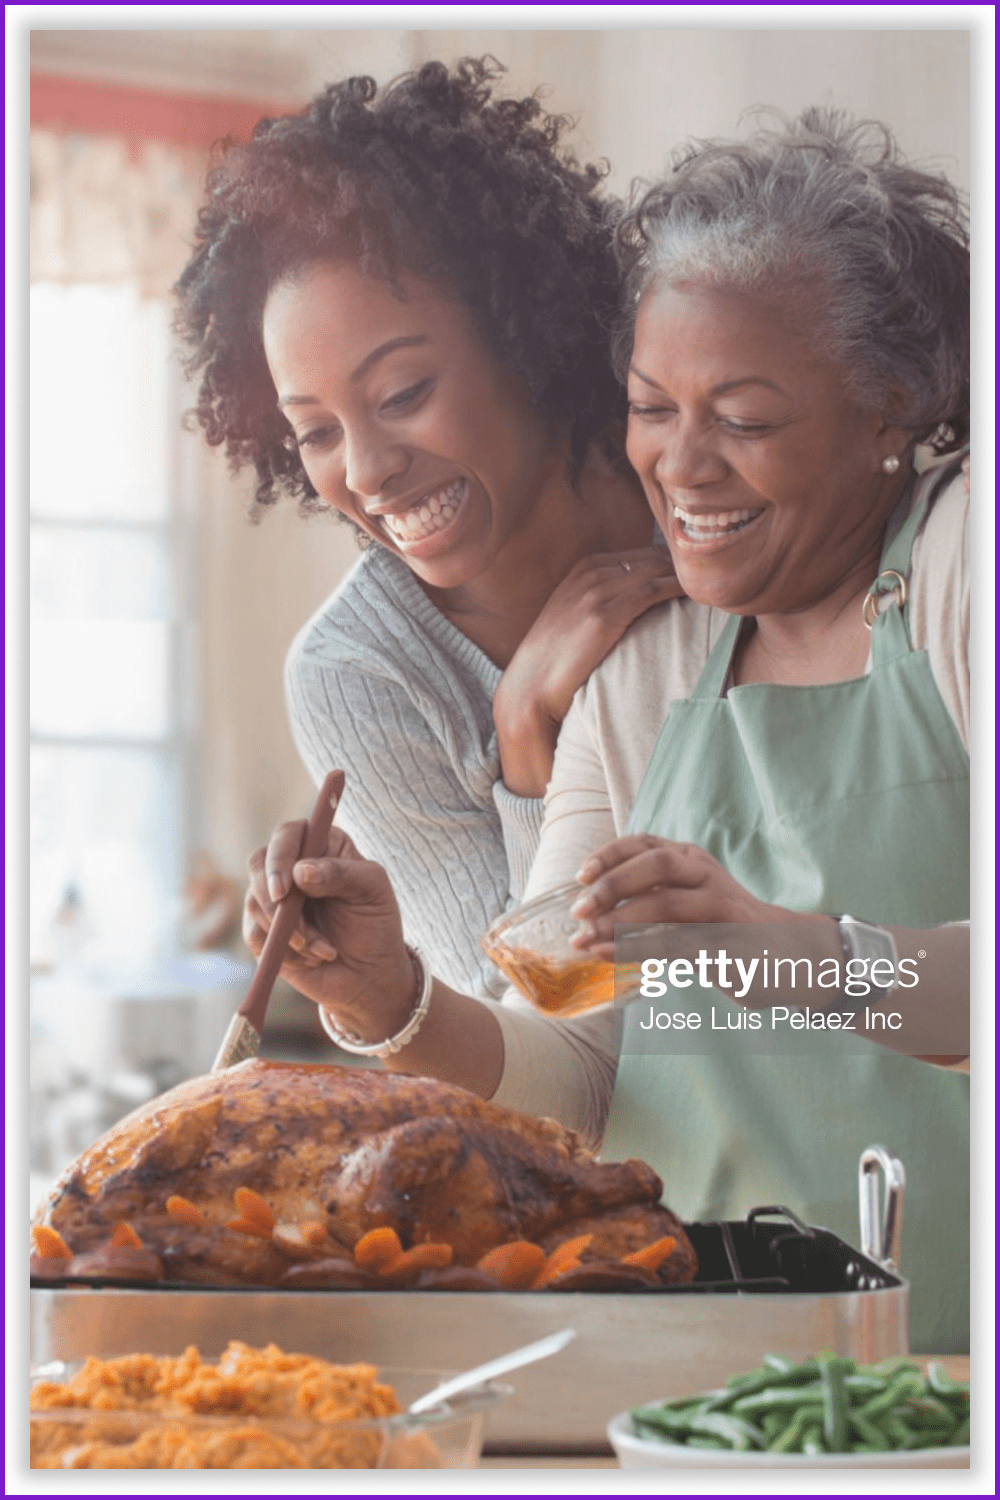 A photo of a mother and daughter preparing a turkey together in the kitchen.